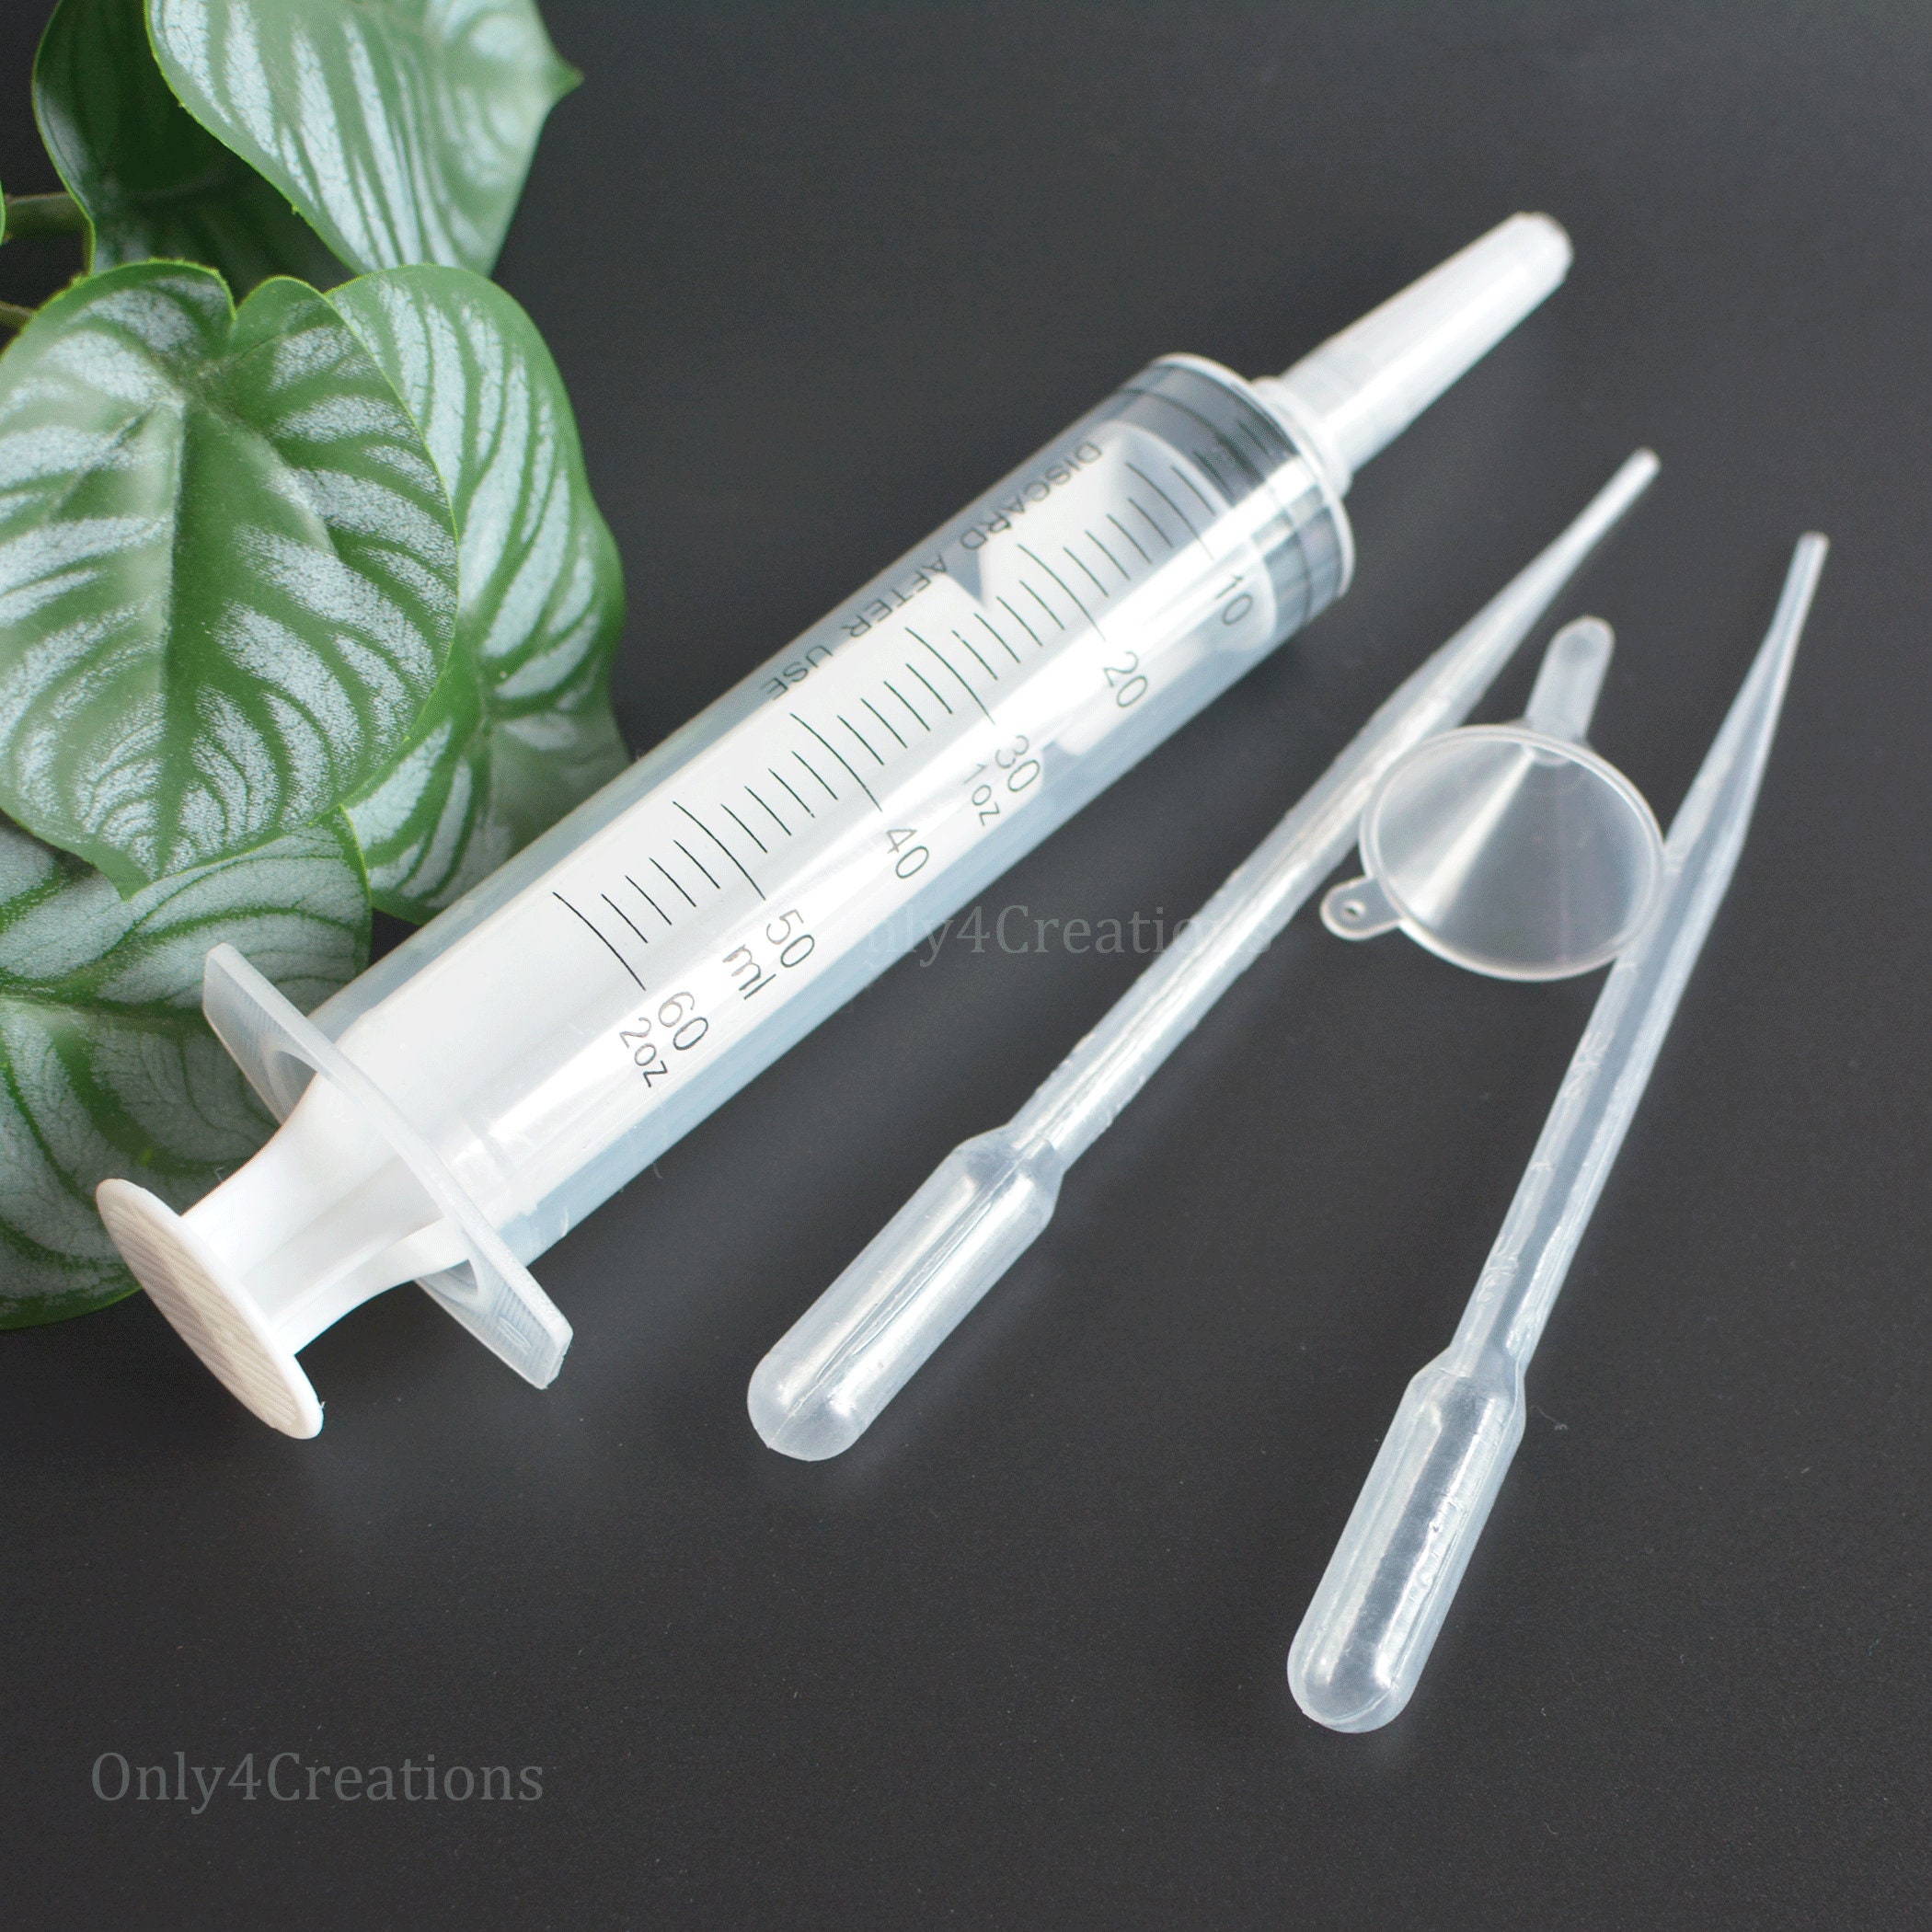 Precision Glue Applicator: 12ml Curved Syringe for Crafting 